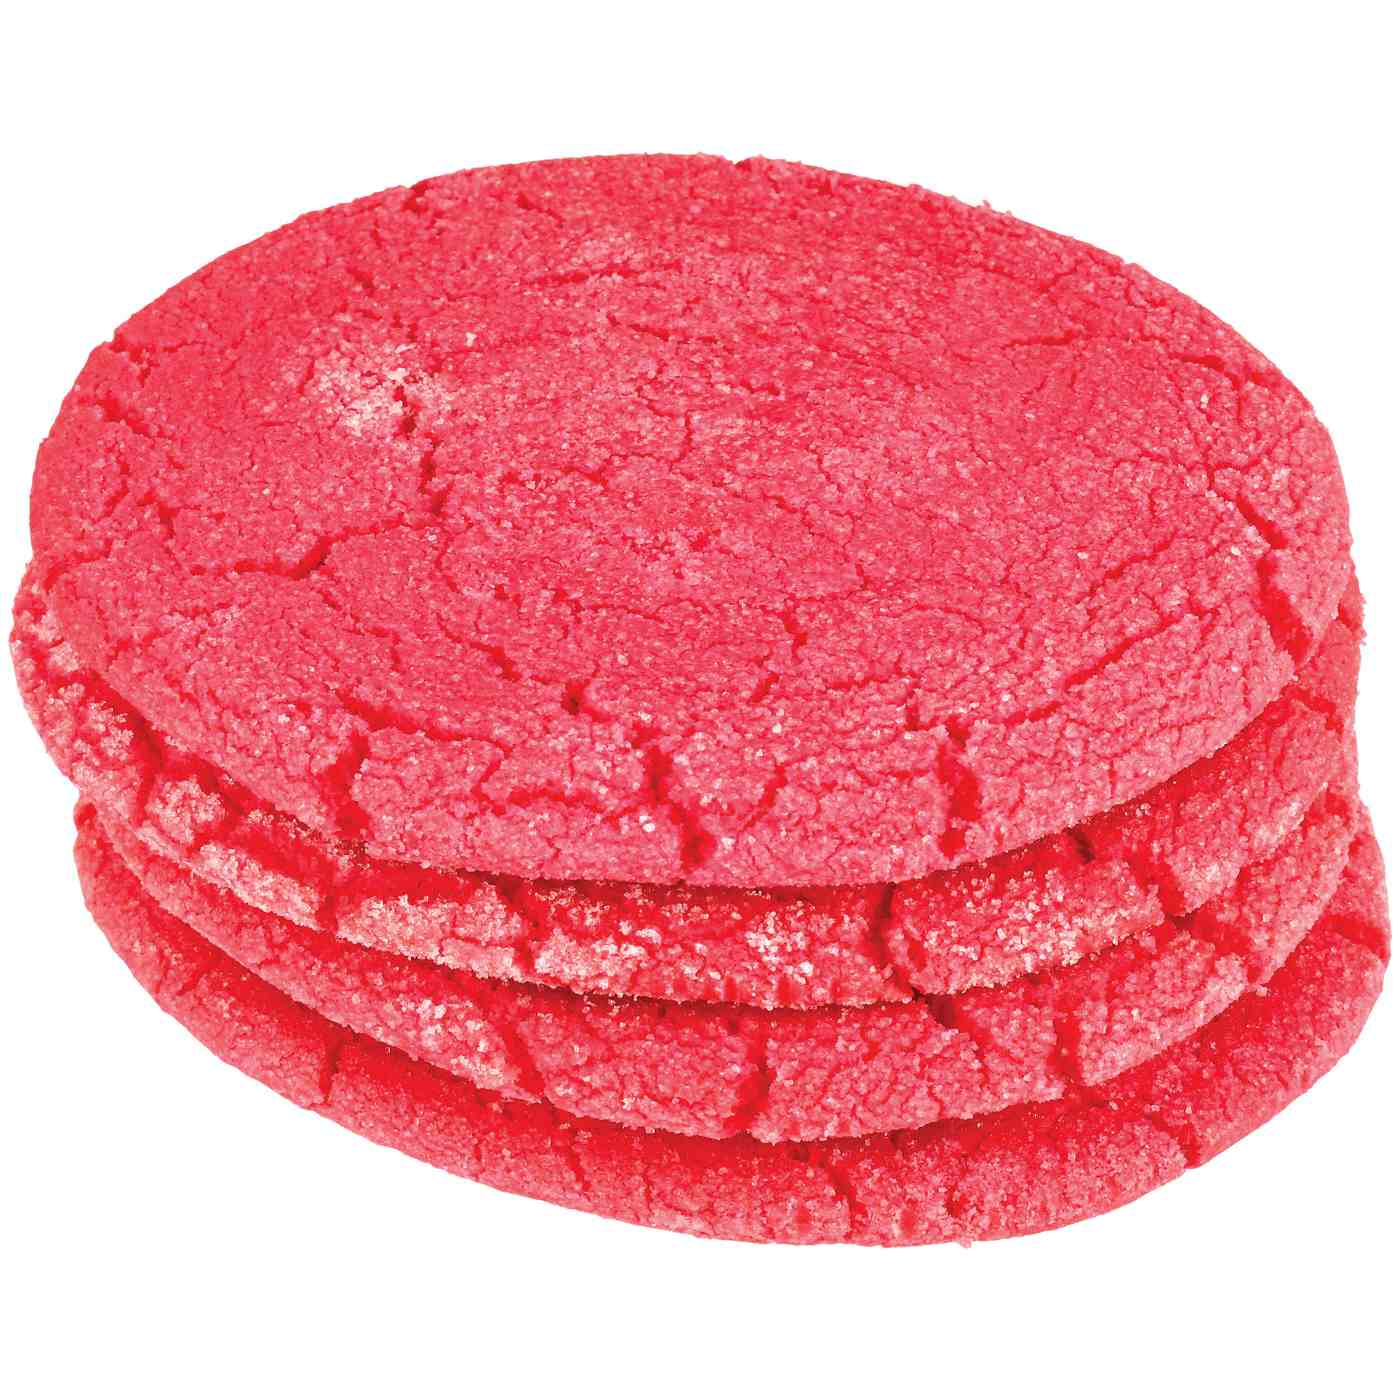 H-E-B Bakery Large Polvoron Cookies - Pink; image 2 of 3